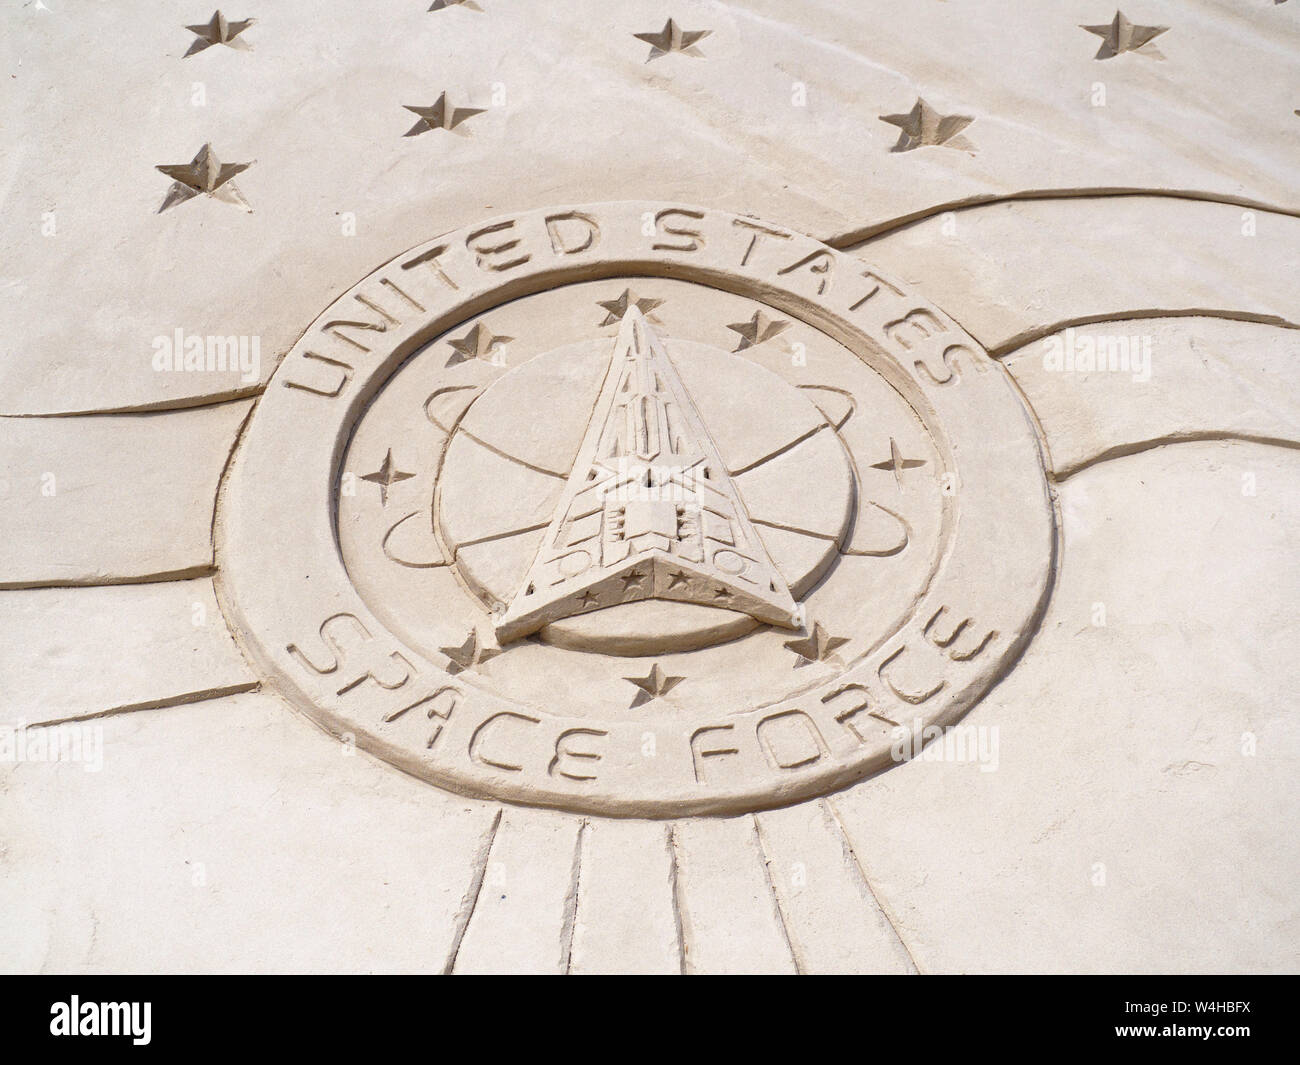 United States Space Force logo sculpted in Sand 2019 Texas Sandfest in Port Aransas, Texas USA. Stockfoto